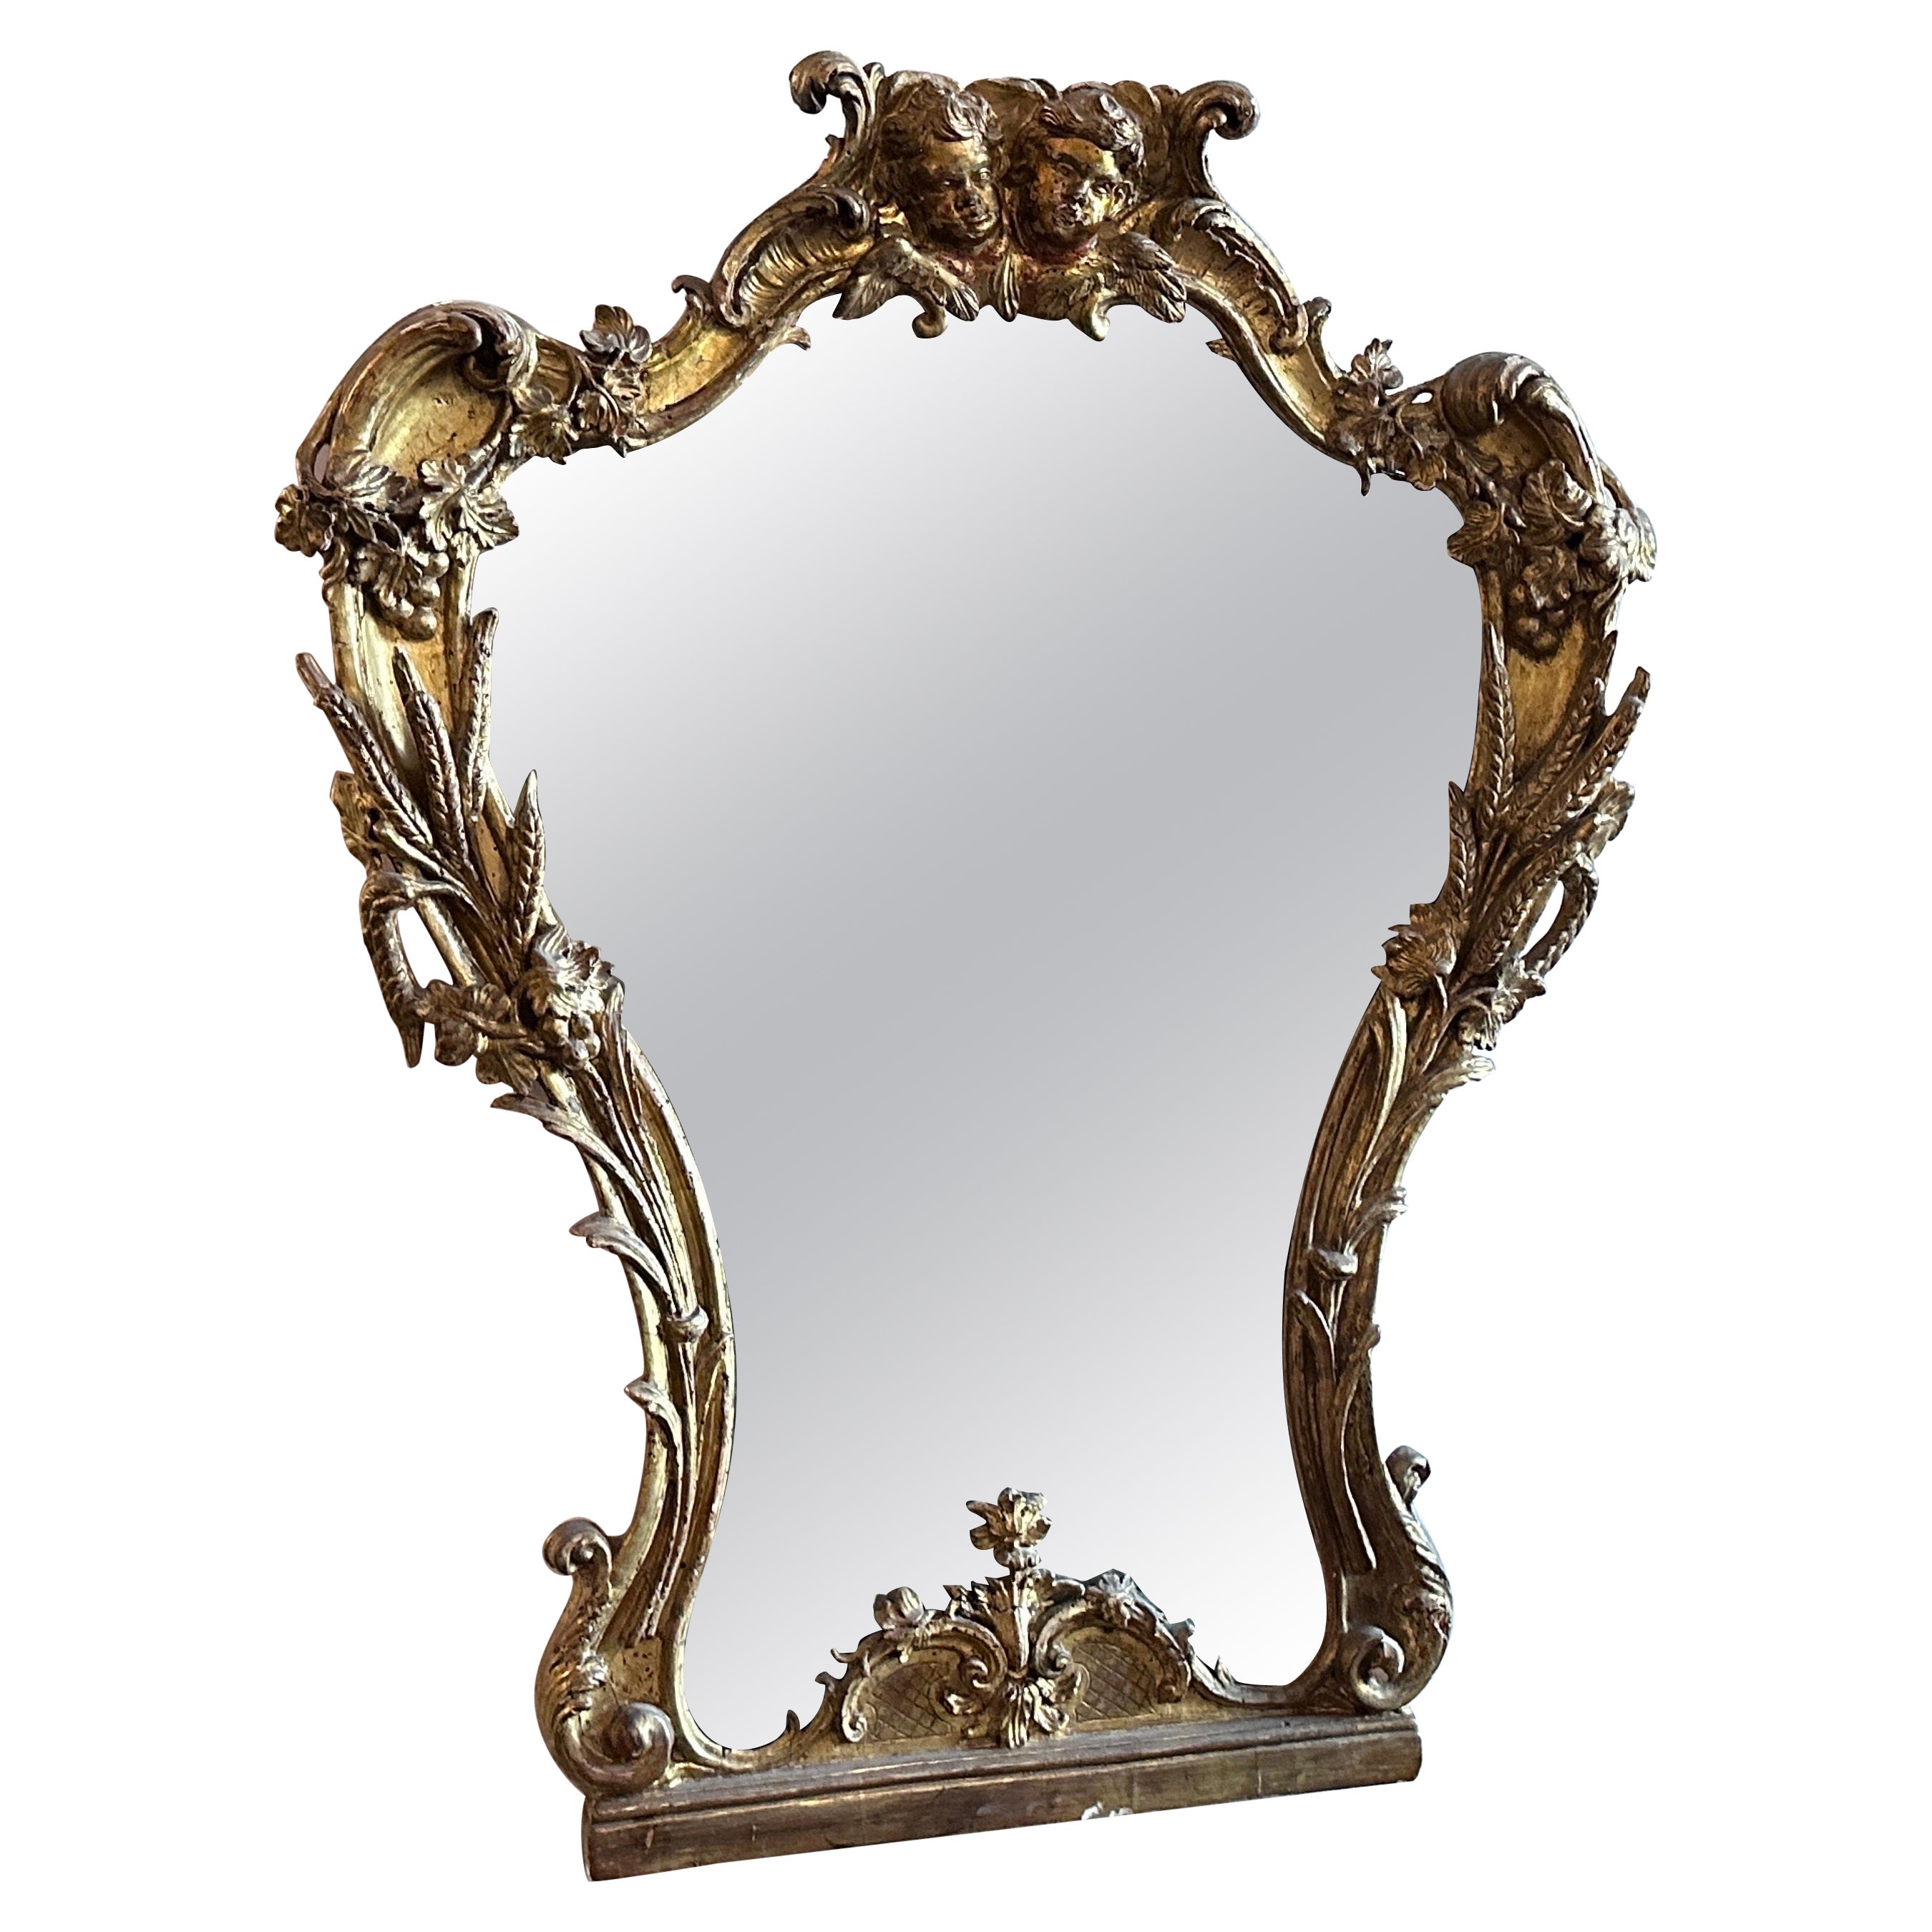 1750s Baroque Hand-Carved Giltwood Sicilian Wall Mirror For Sale